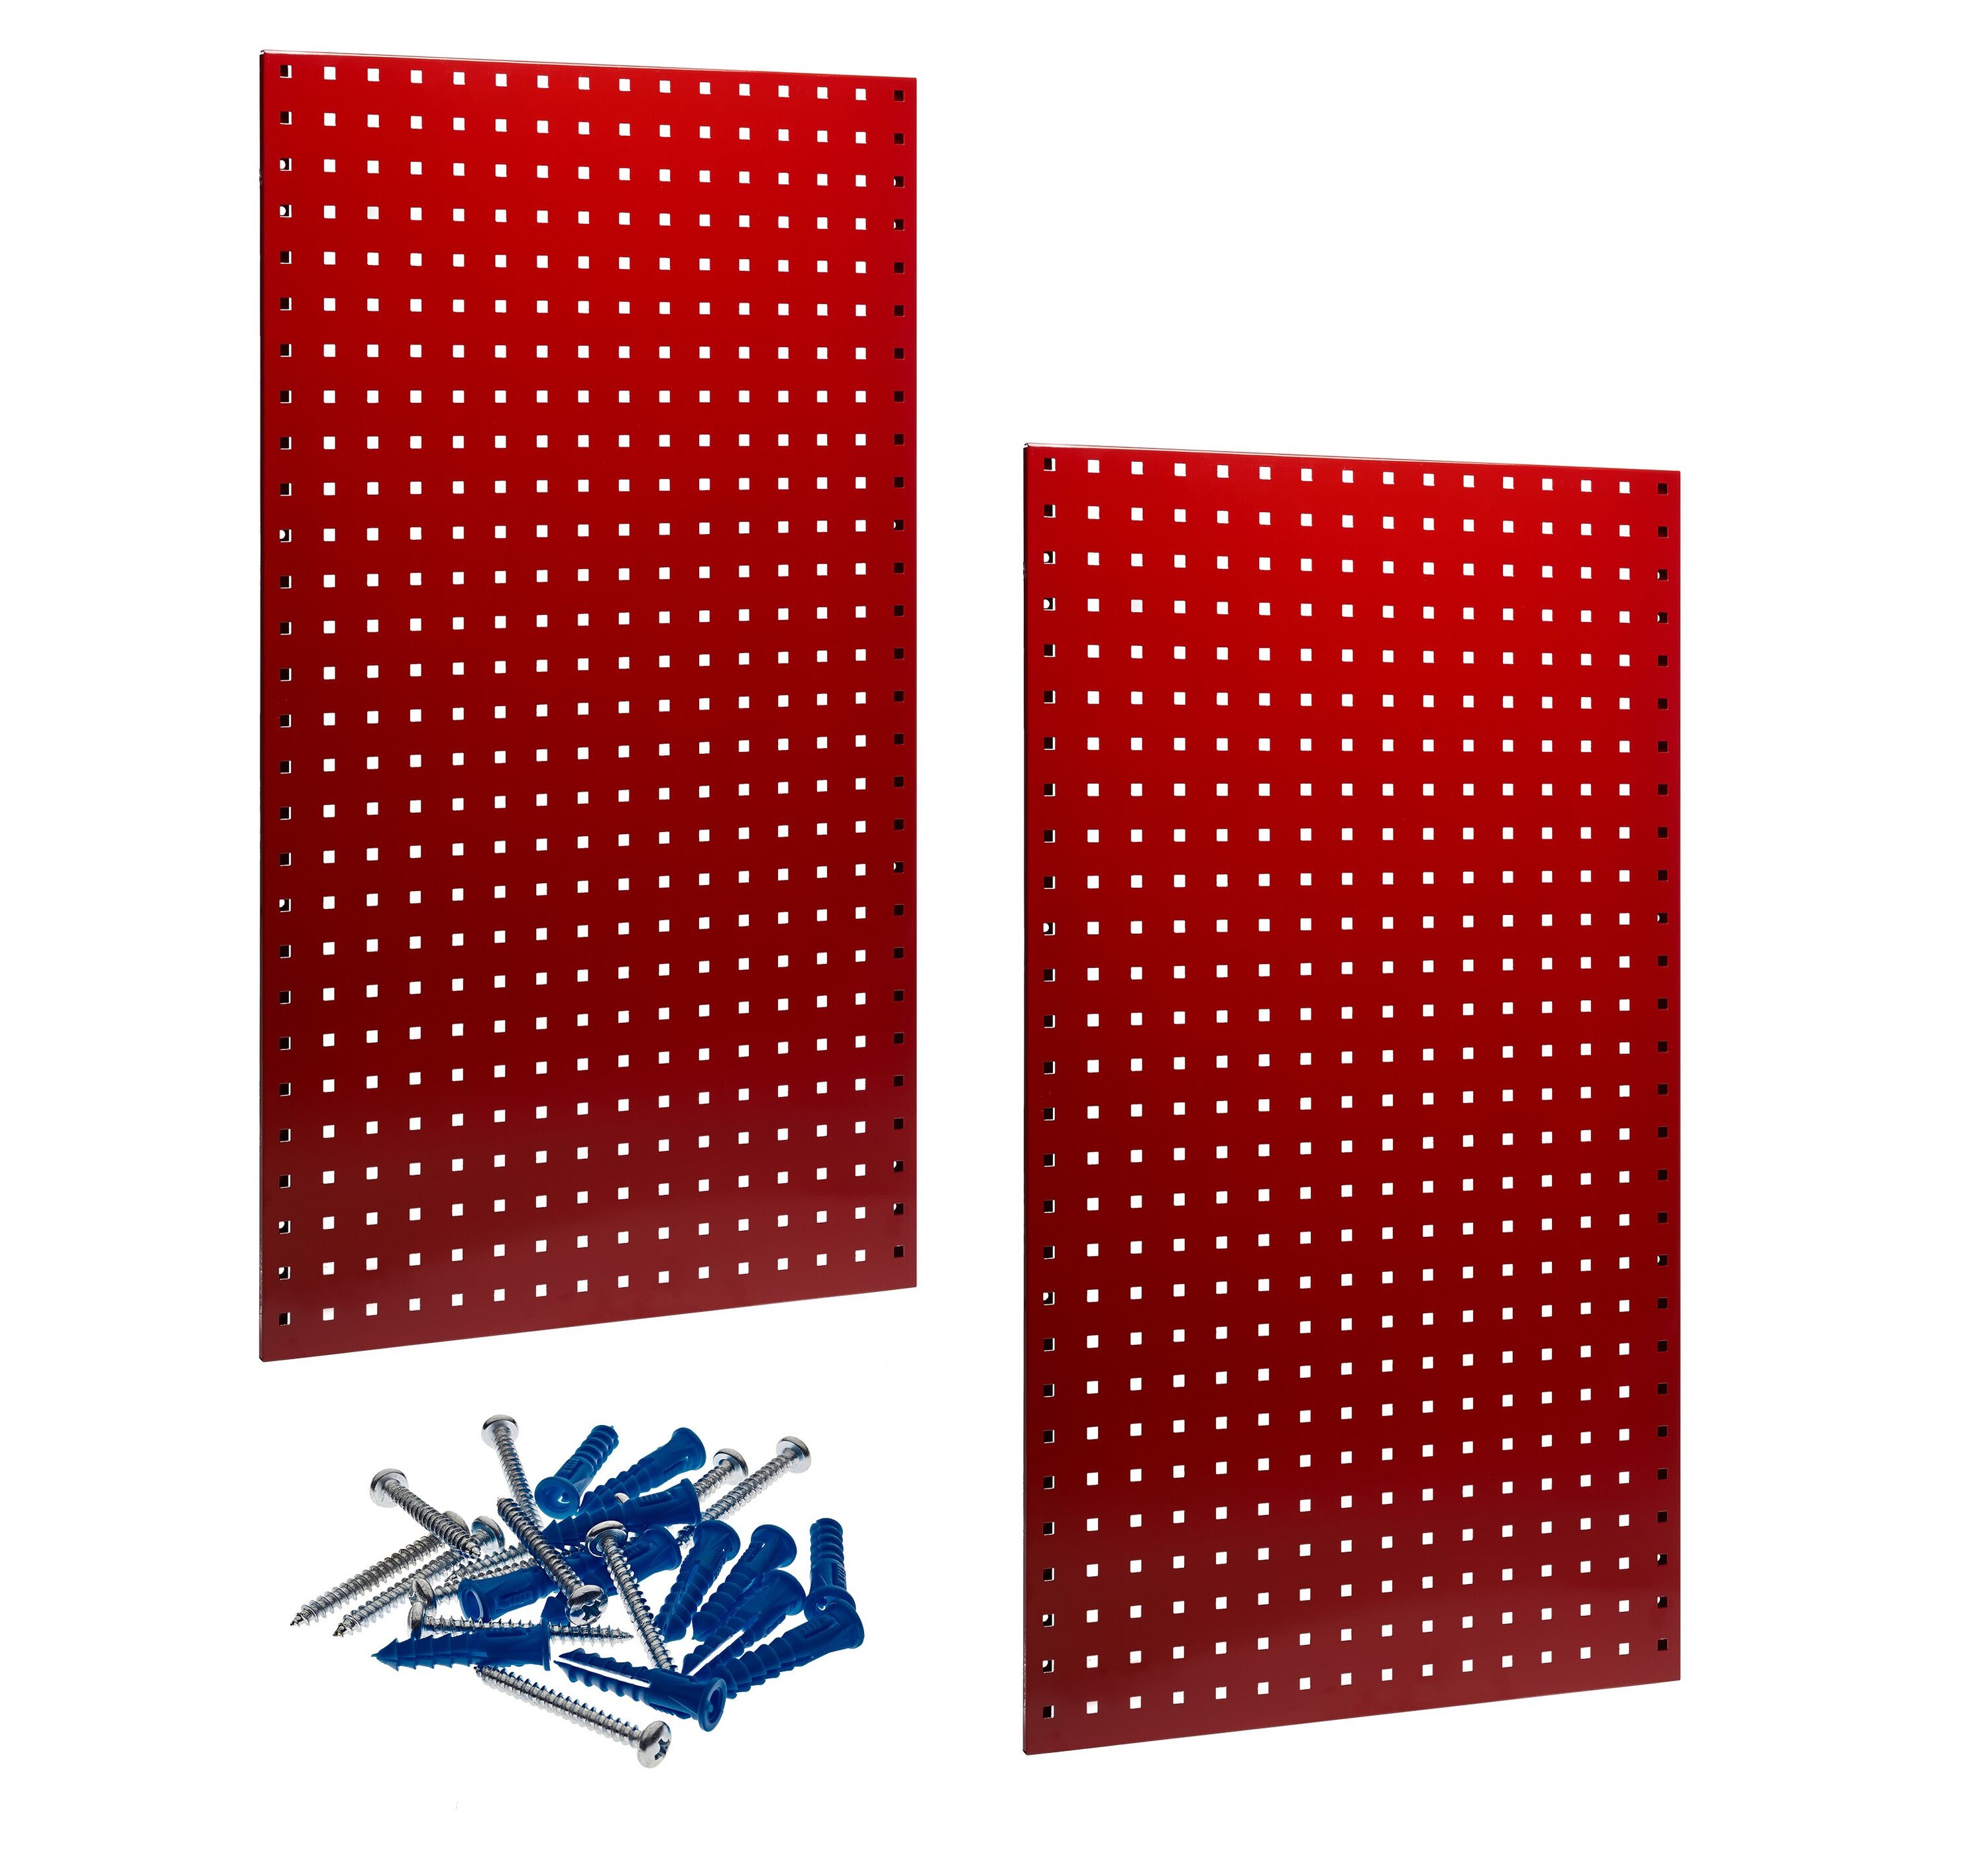 Large Square Pegboards - 2 Ct